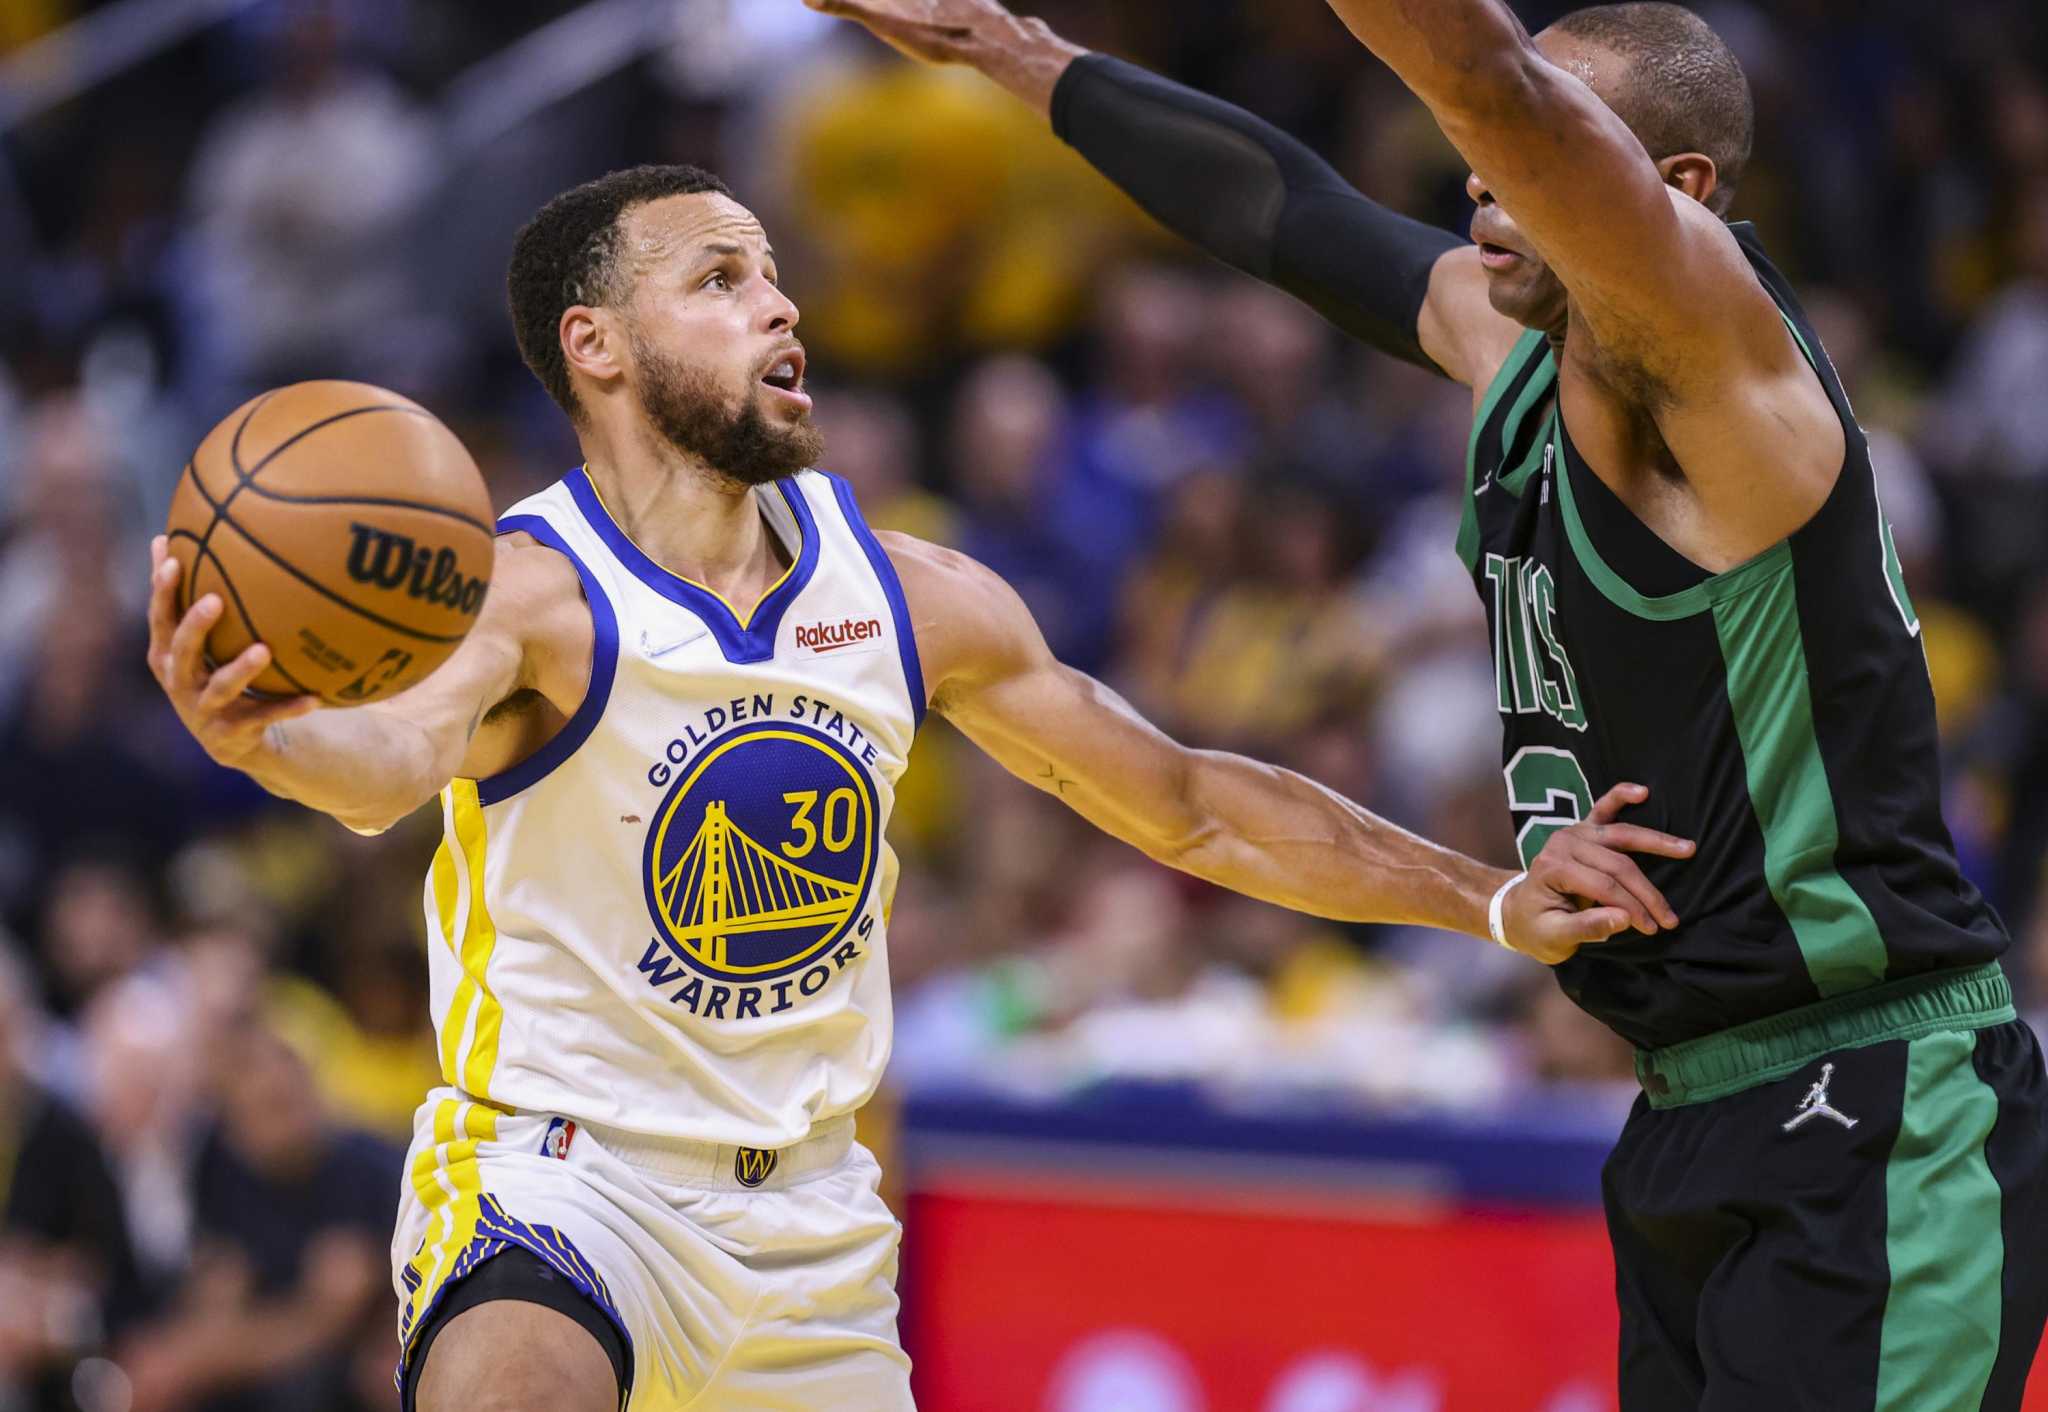 Warriors’ trainingcamp preview How long can Steph Curry extend his